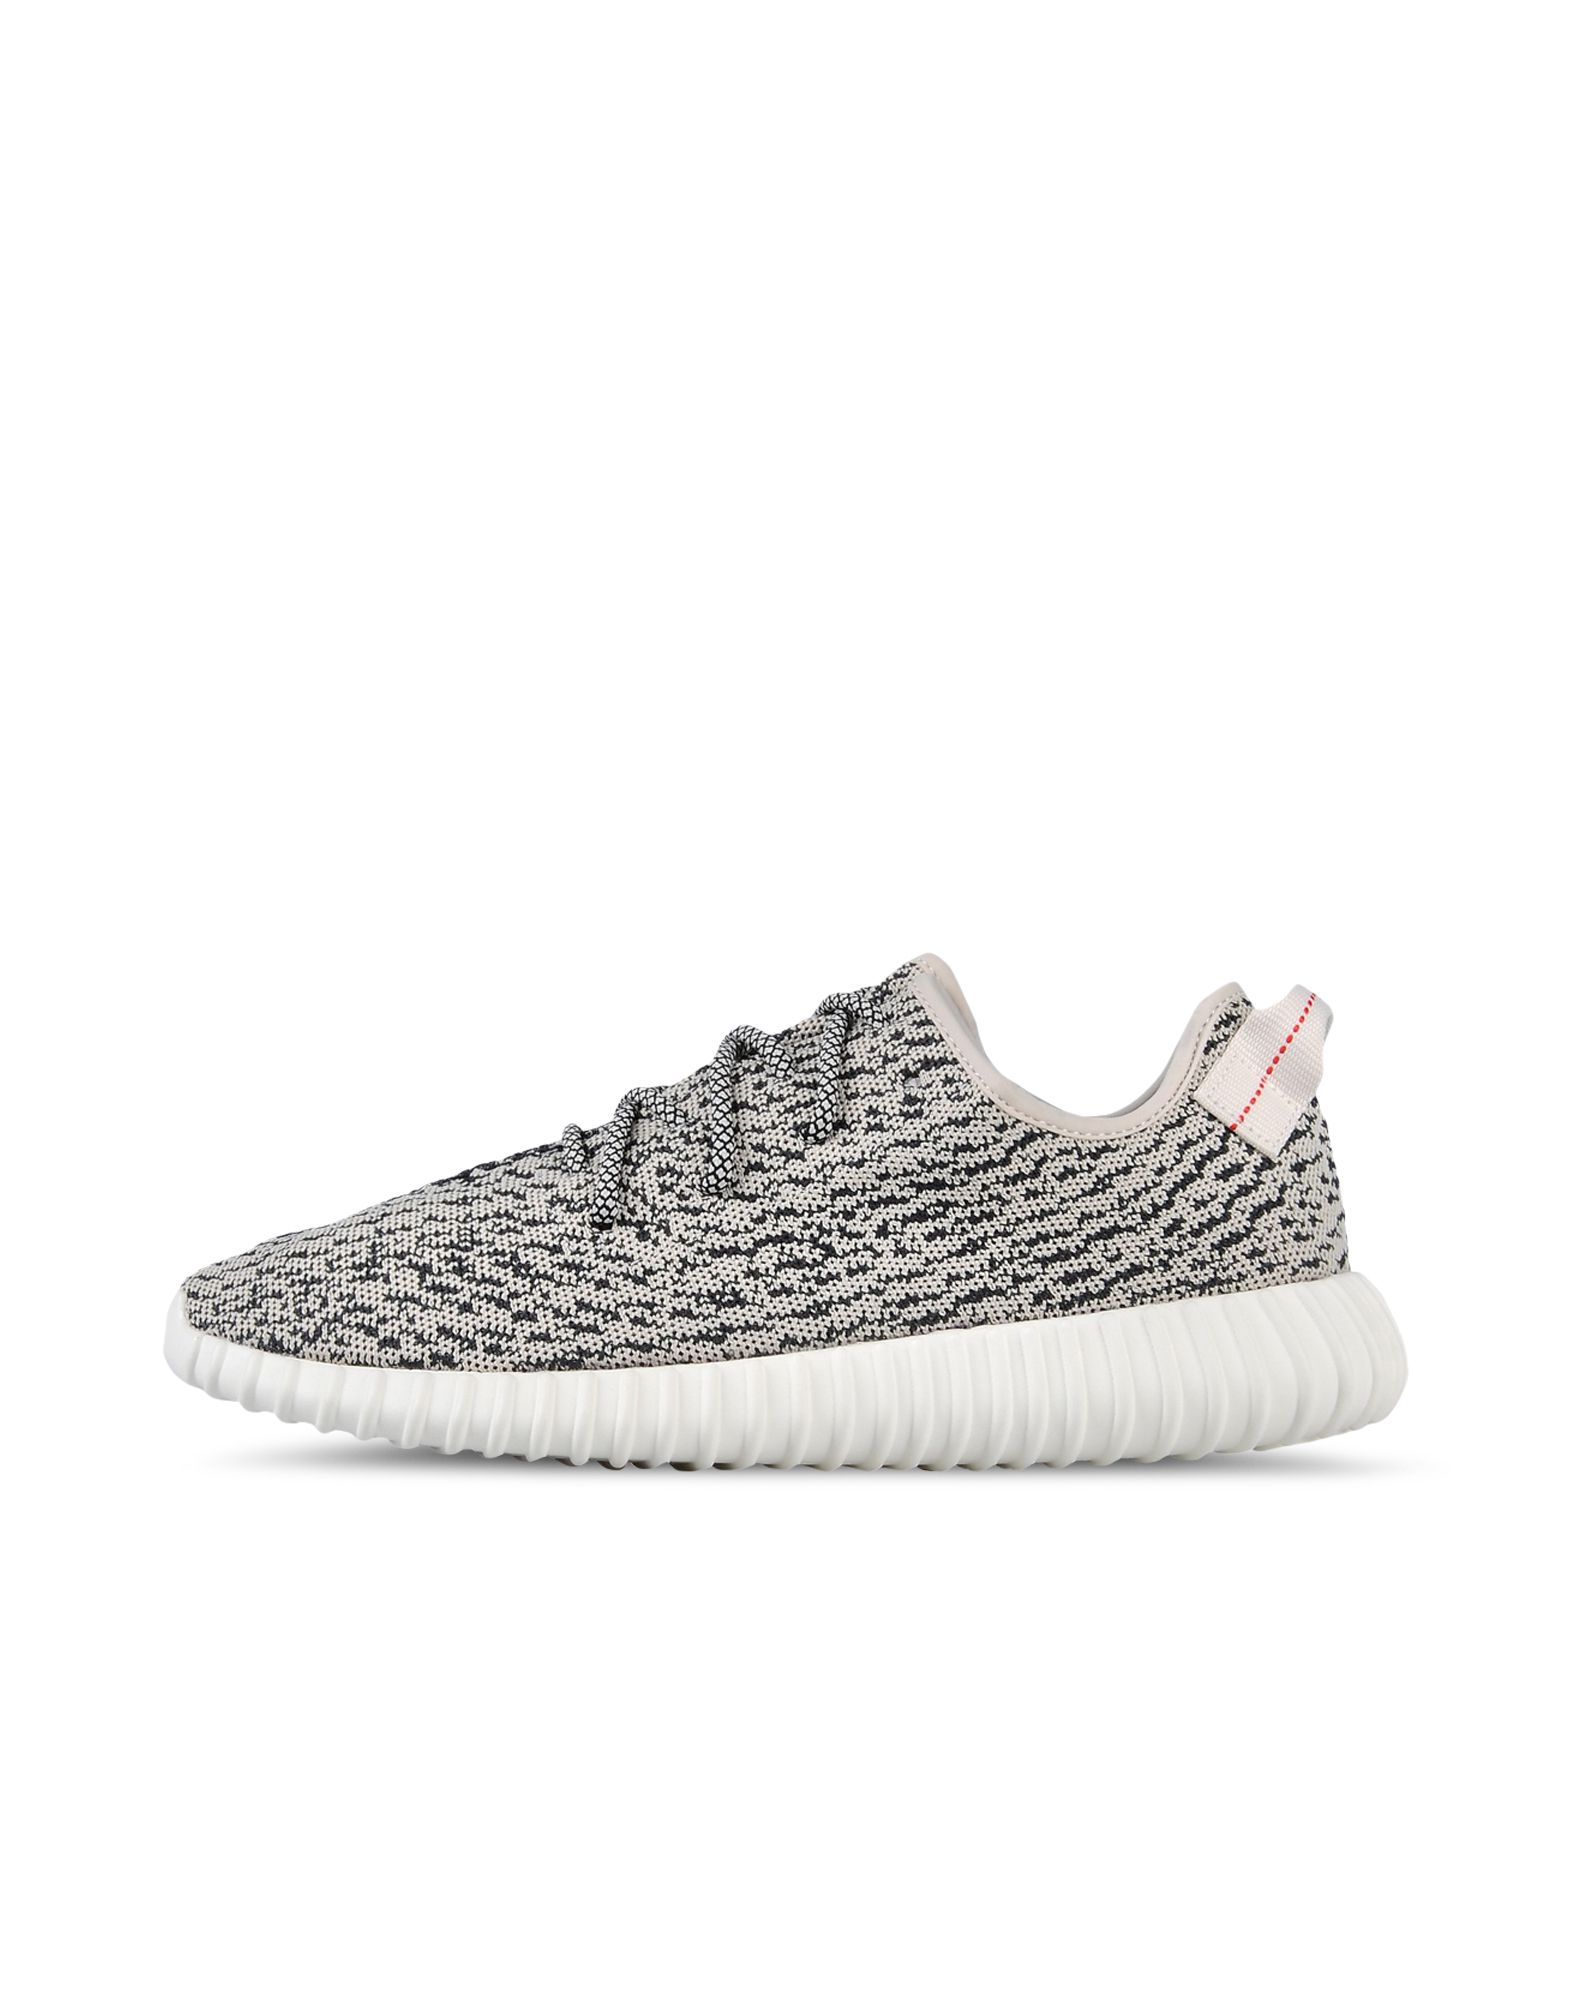 Discount Adidas yeezy trainers Men's Shoes Where To Buy